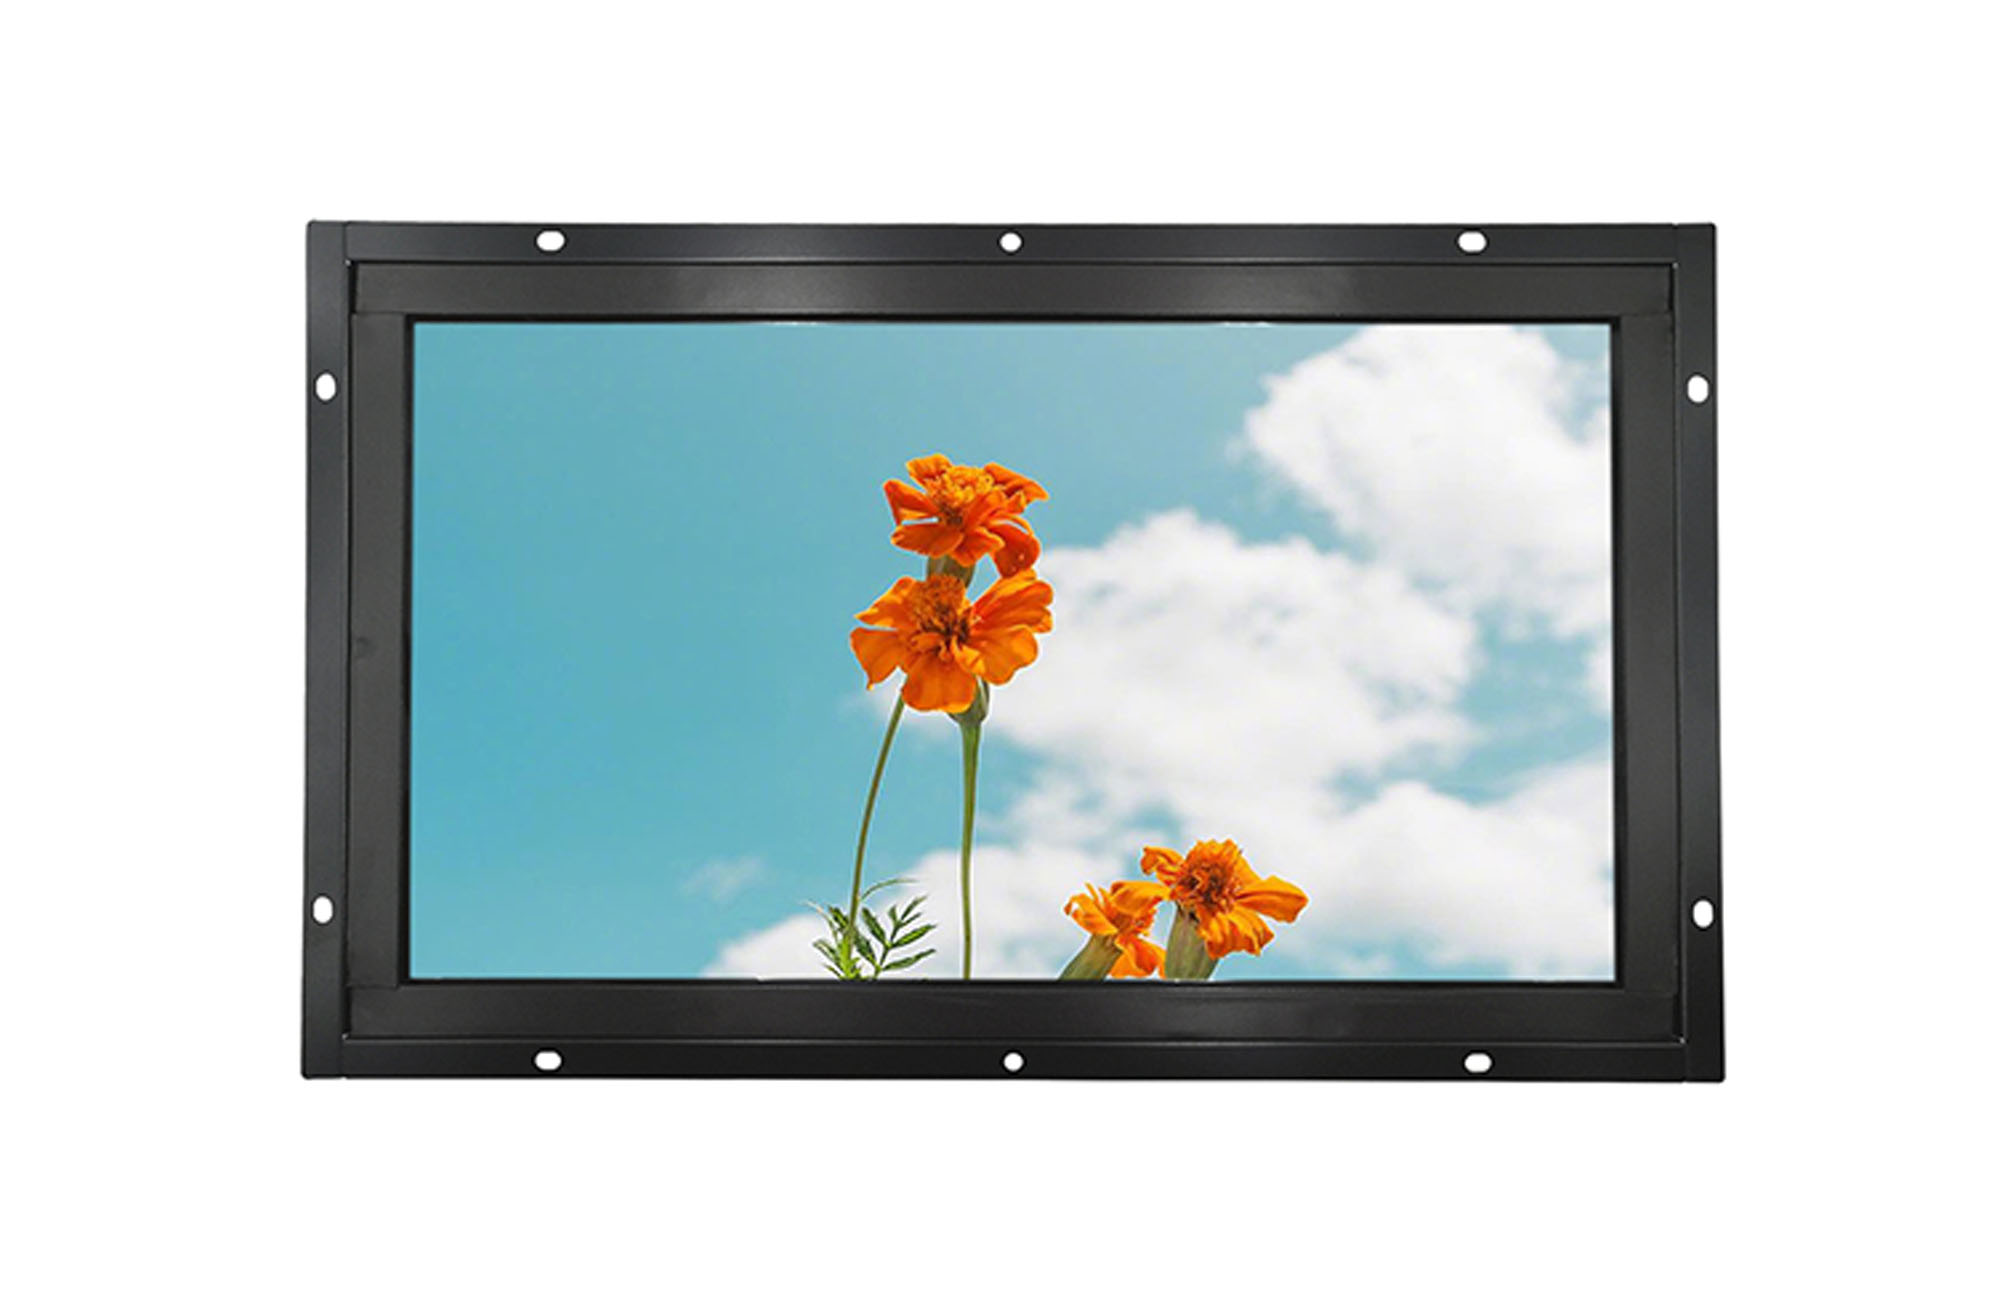 21.5 Inch Android All-in-one Panel PC